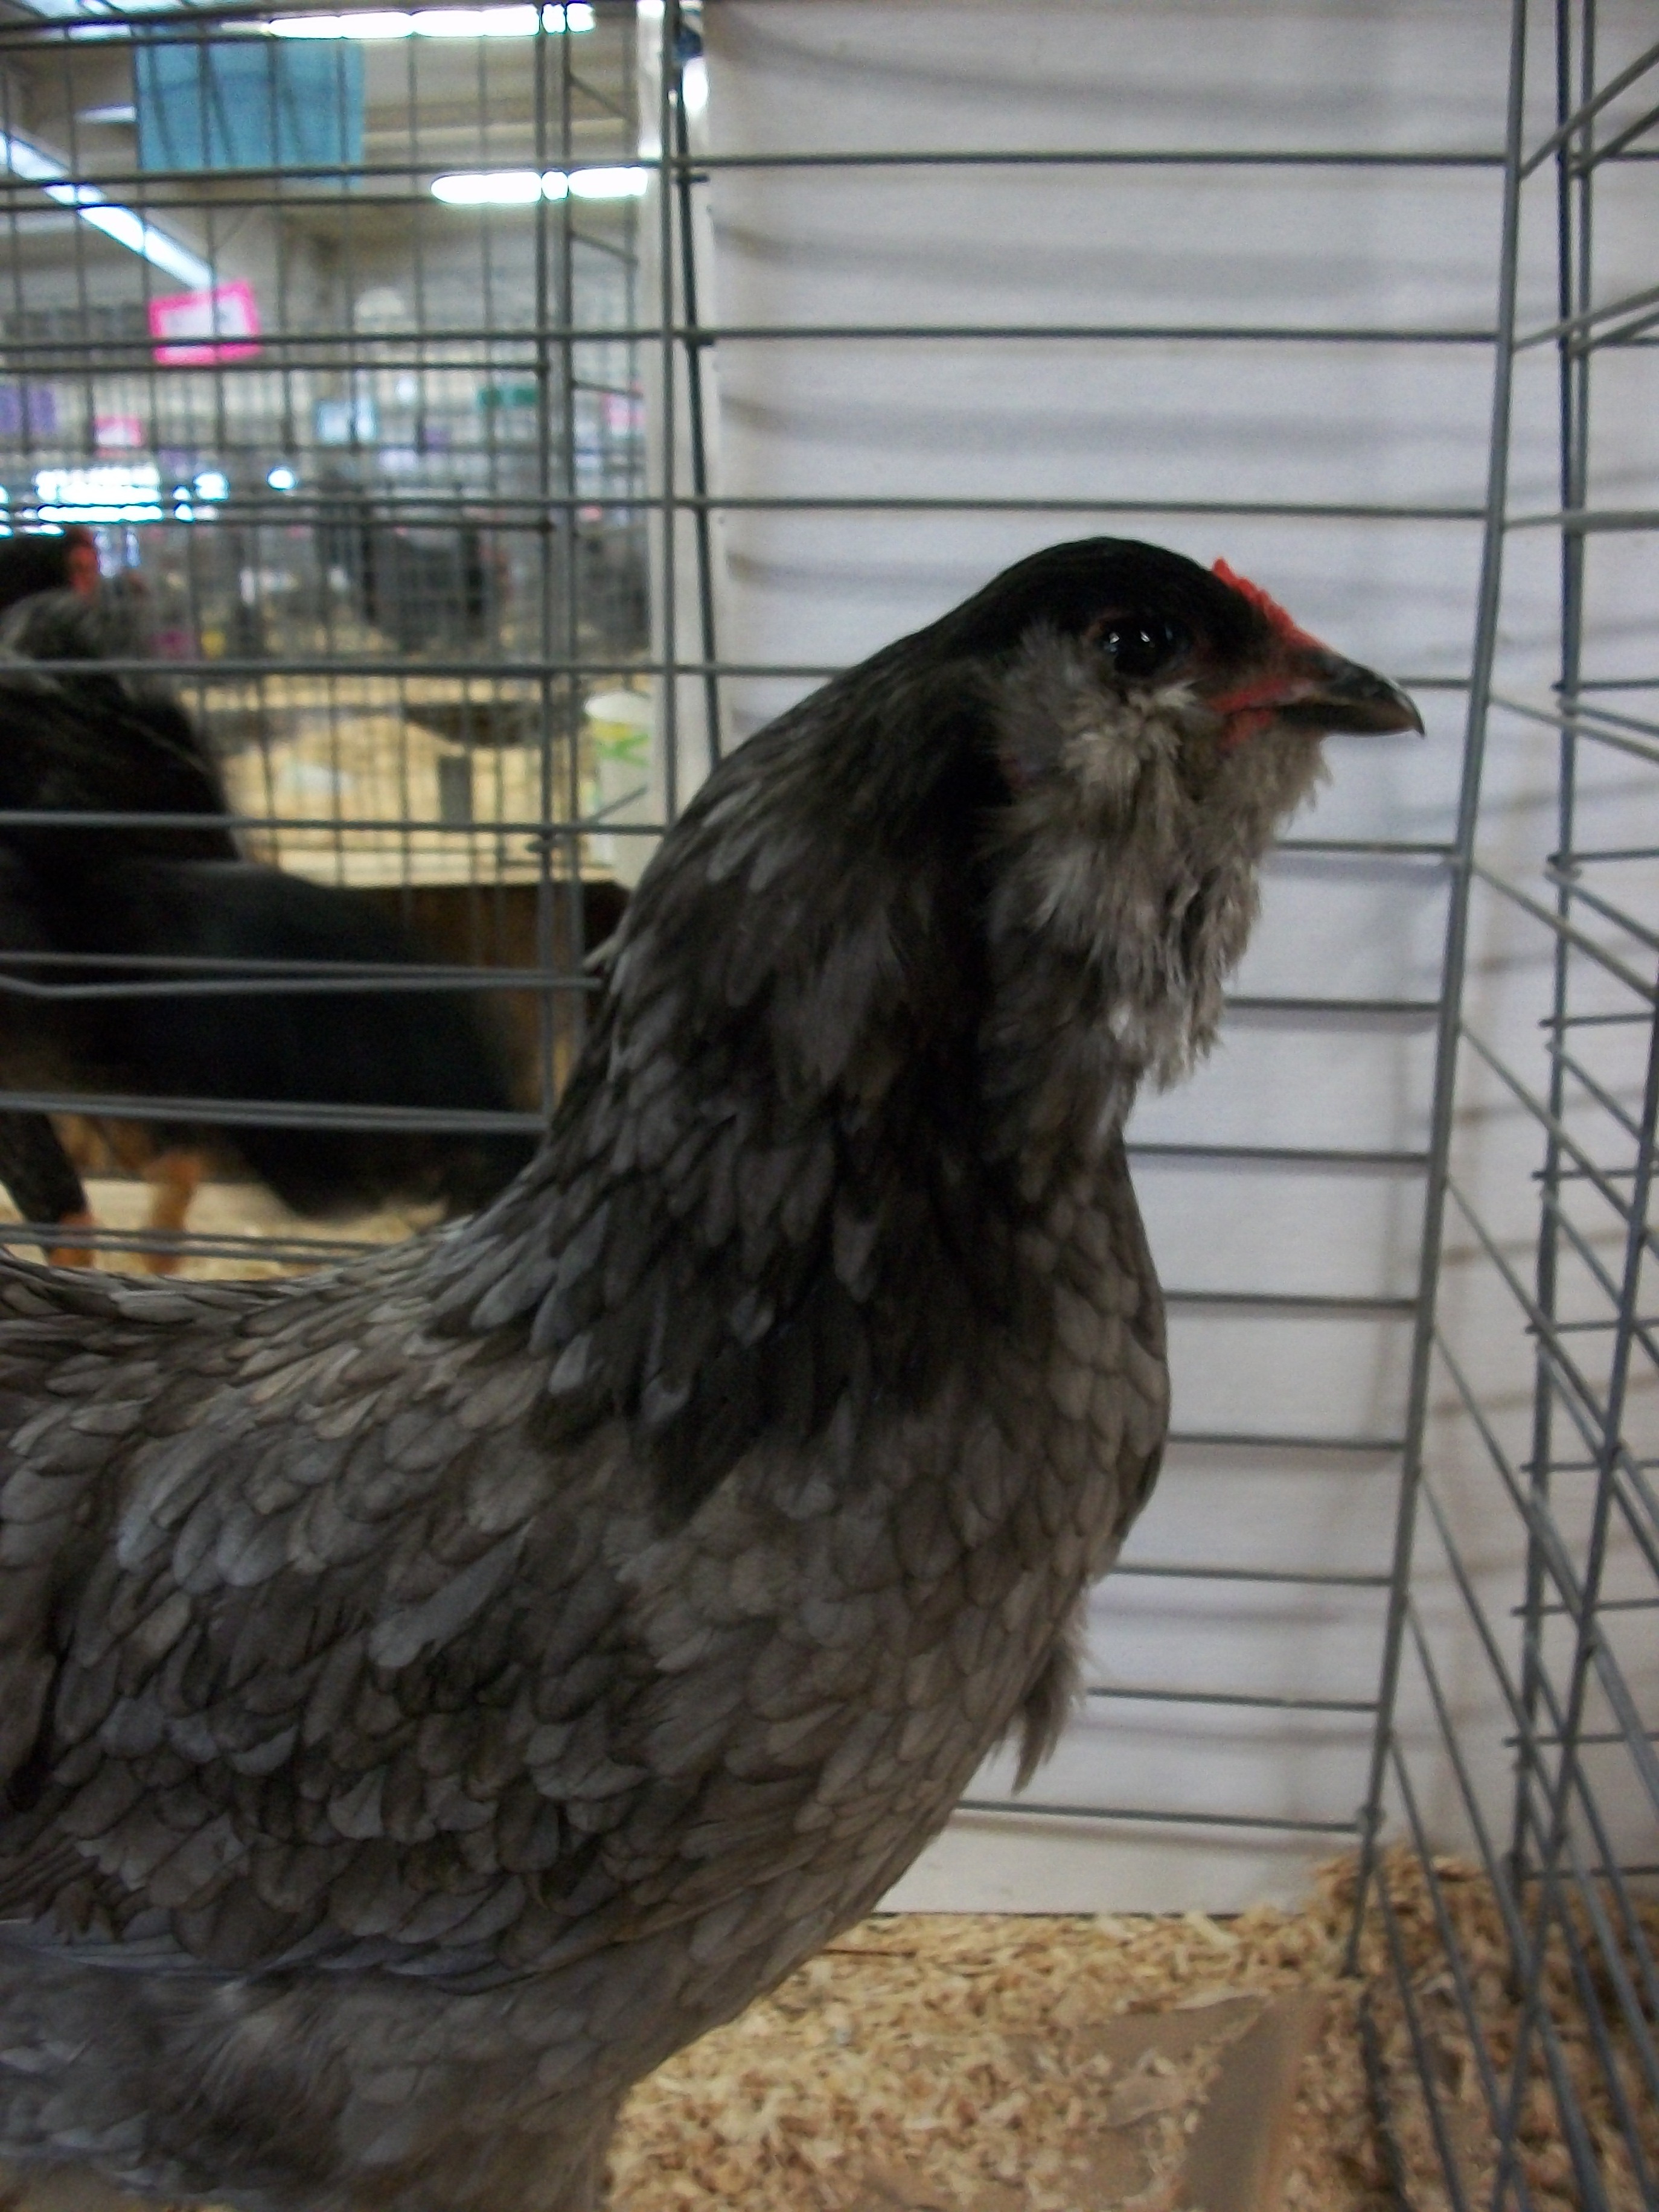 This is my Blue Amerucana hen at the GCPF show in Hollister a couple of years ago. She was a year old in this picture, and she looks even better now that she has aged some.
Her beard and muffs are fuller. She does very well in shows, and I am currently looking for a blue rooster so I can hatch some more blues. :)